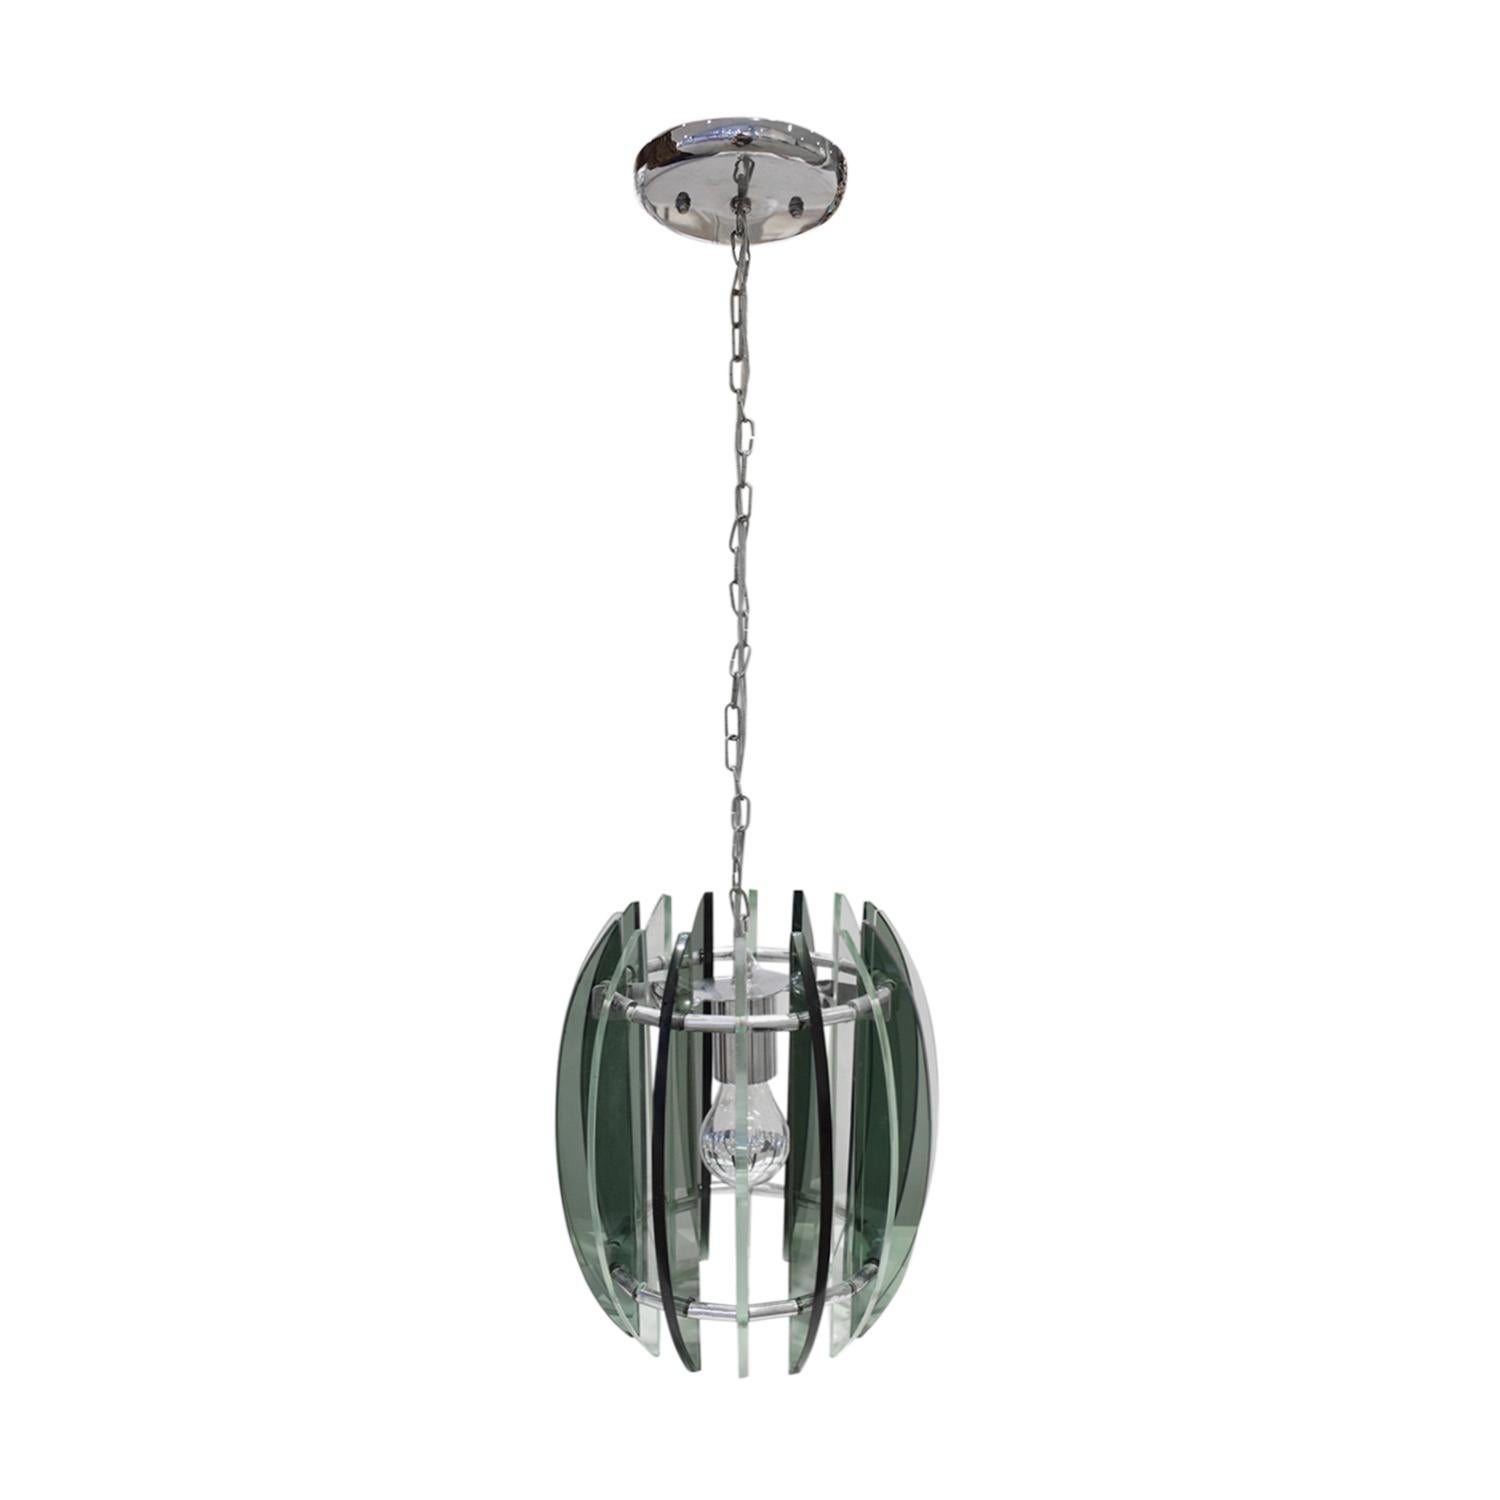 Mid-Century Modern Chandelier in Chrome and Glass in the Style of Fontana Arte, 1970s For Sale